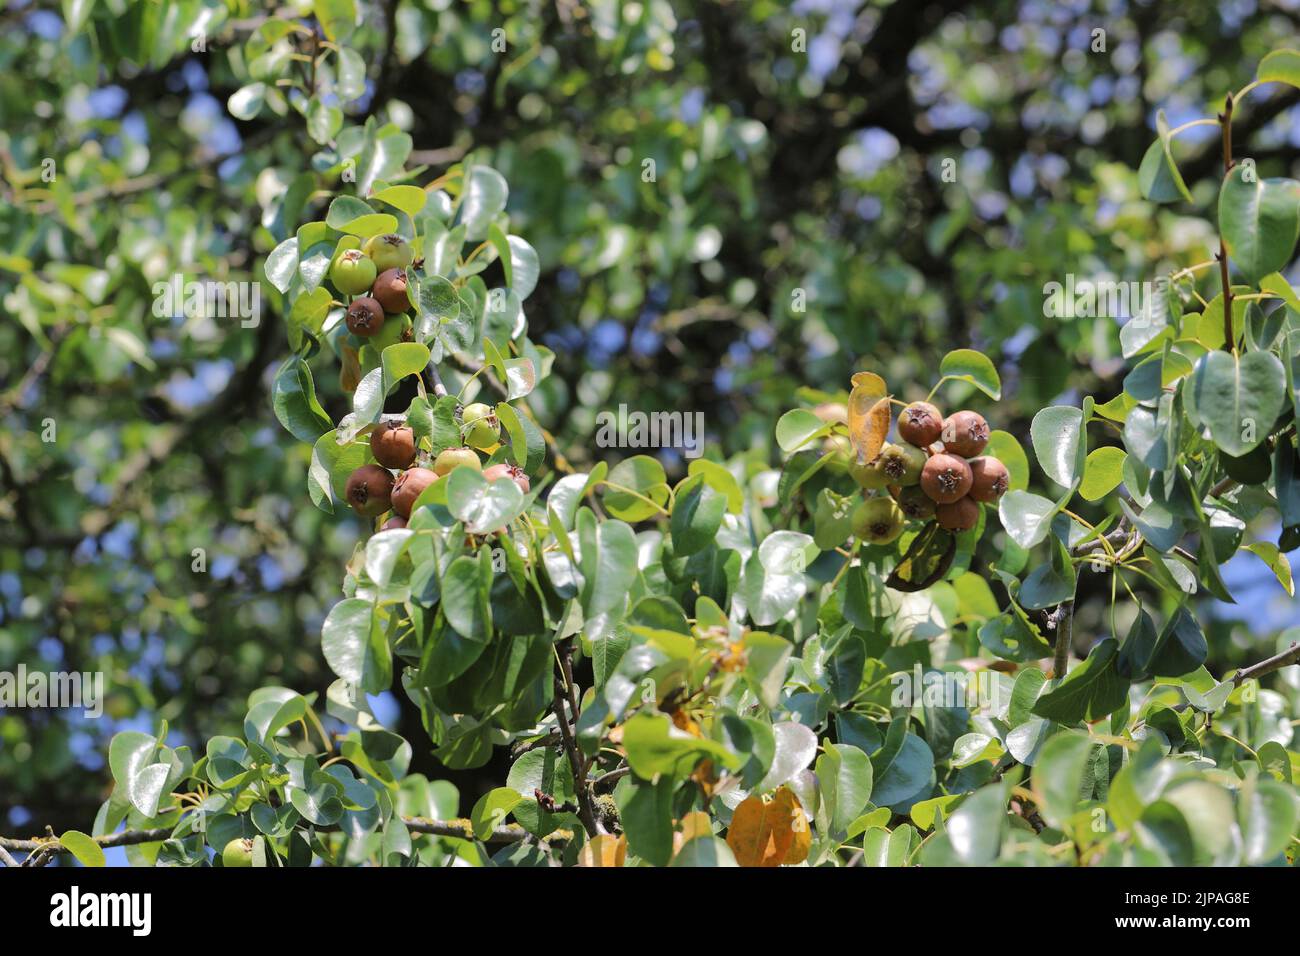 A rotting pear hanging on a tree on fruit tree in an orchard. Stock Photo